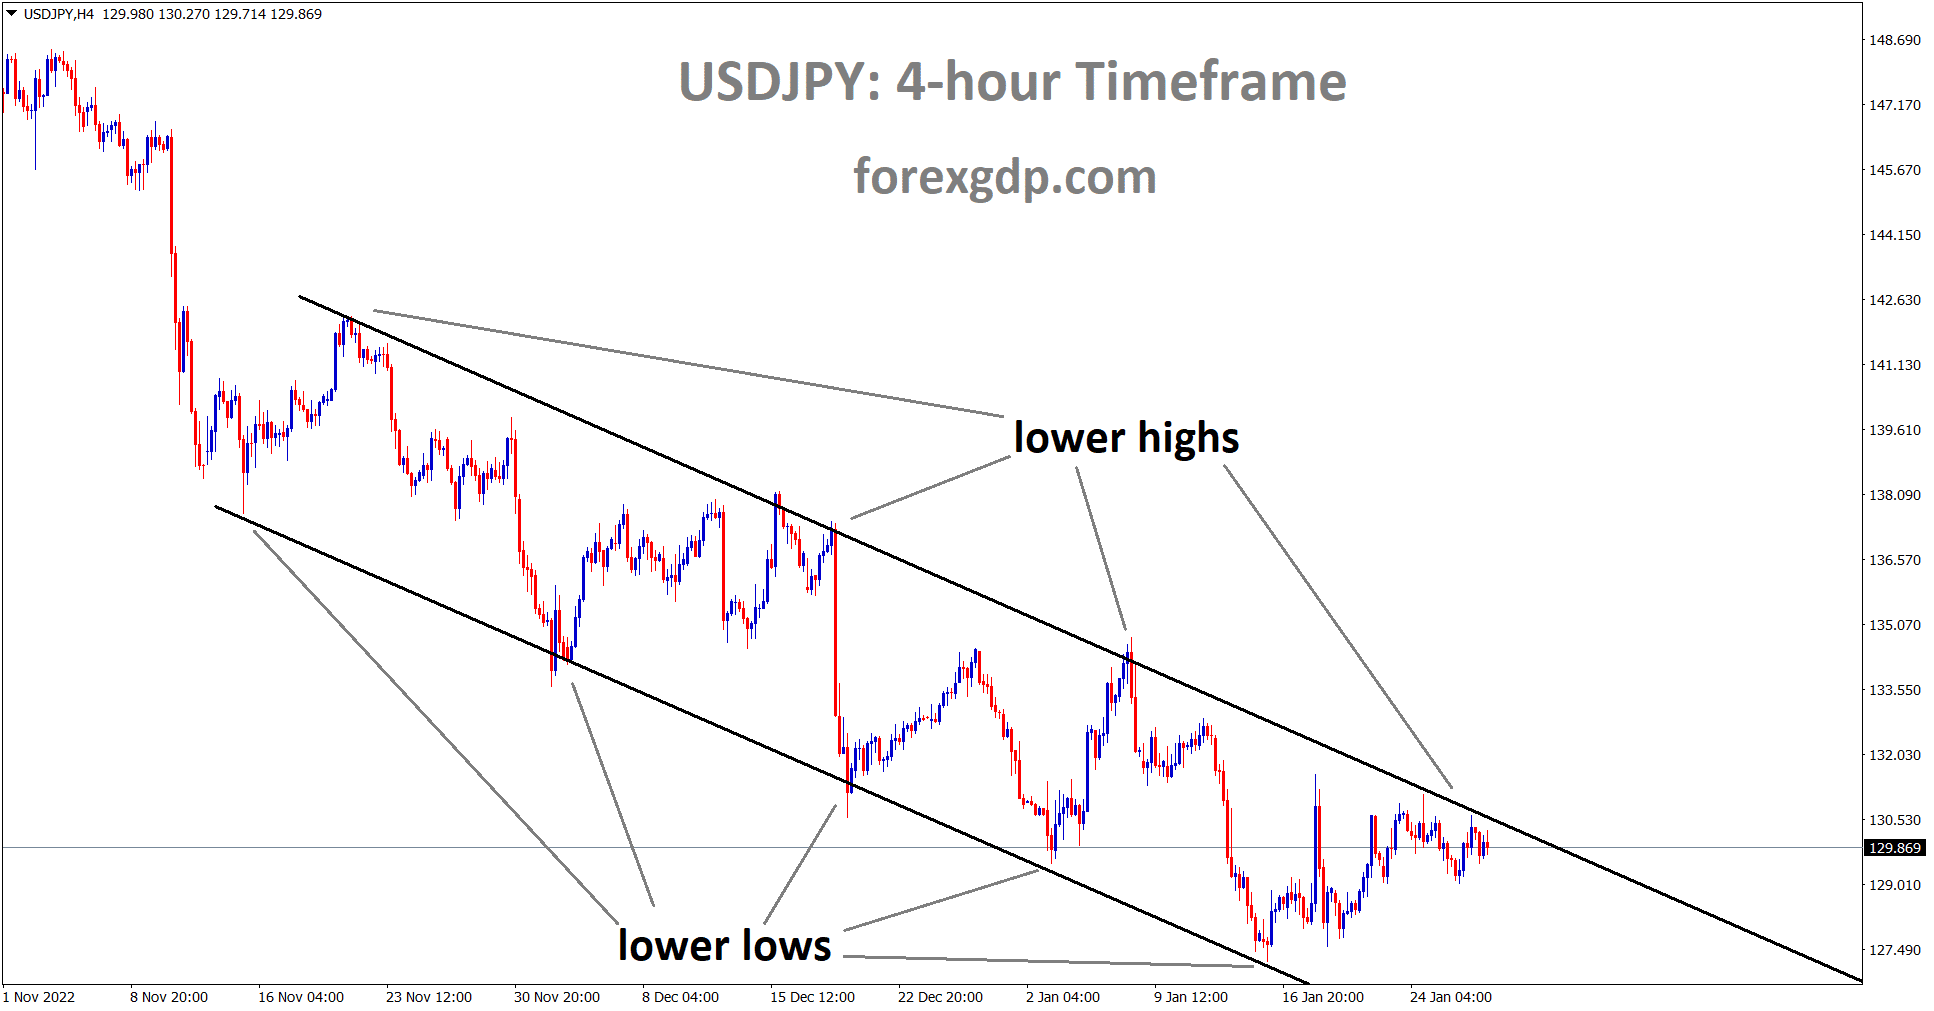 USDJPY is moving in a Descending channel and the market has reached the lower high area of the channel.